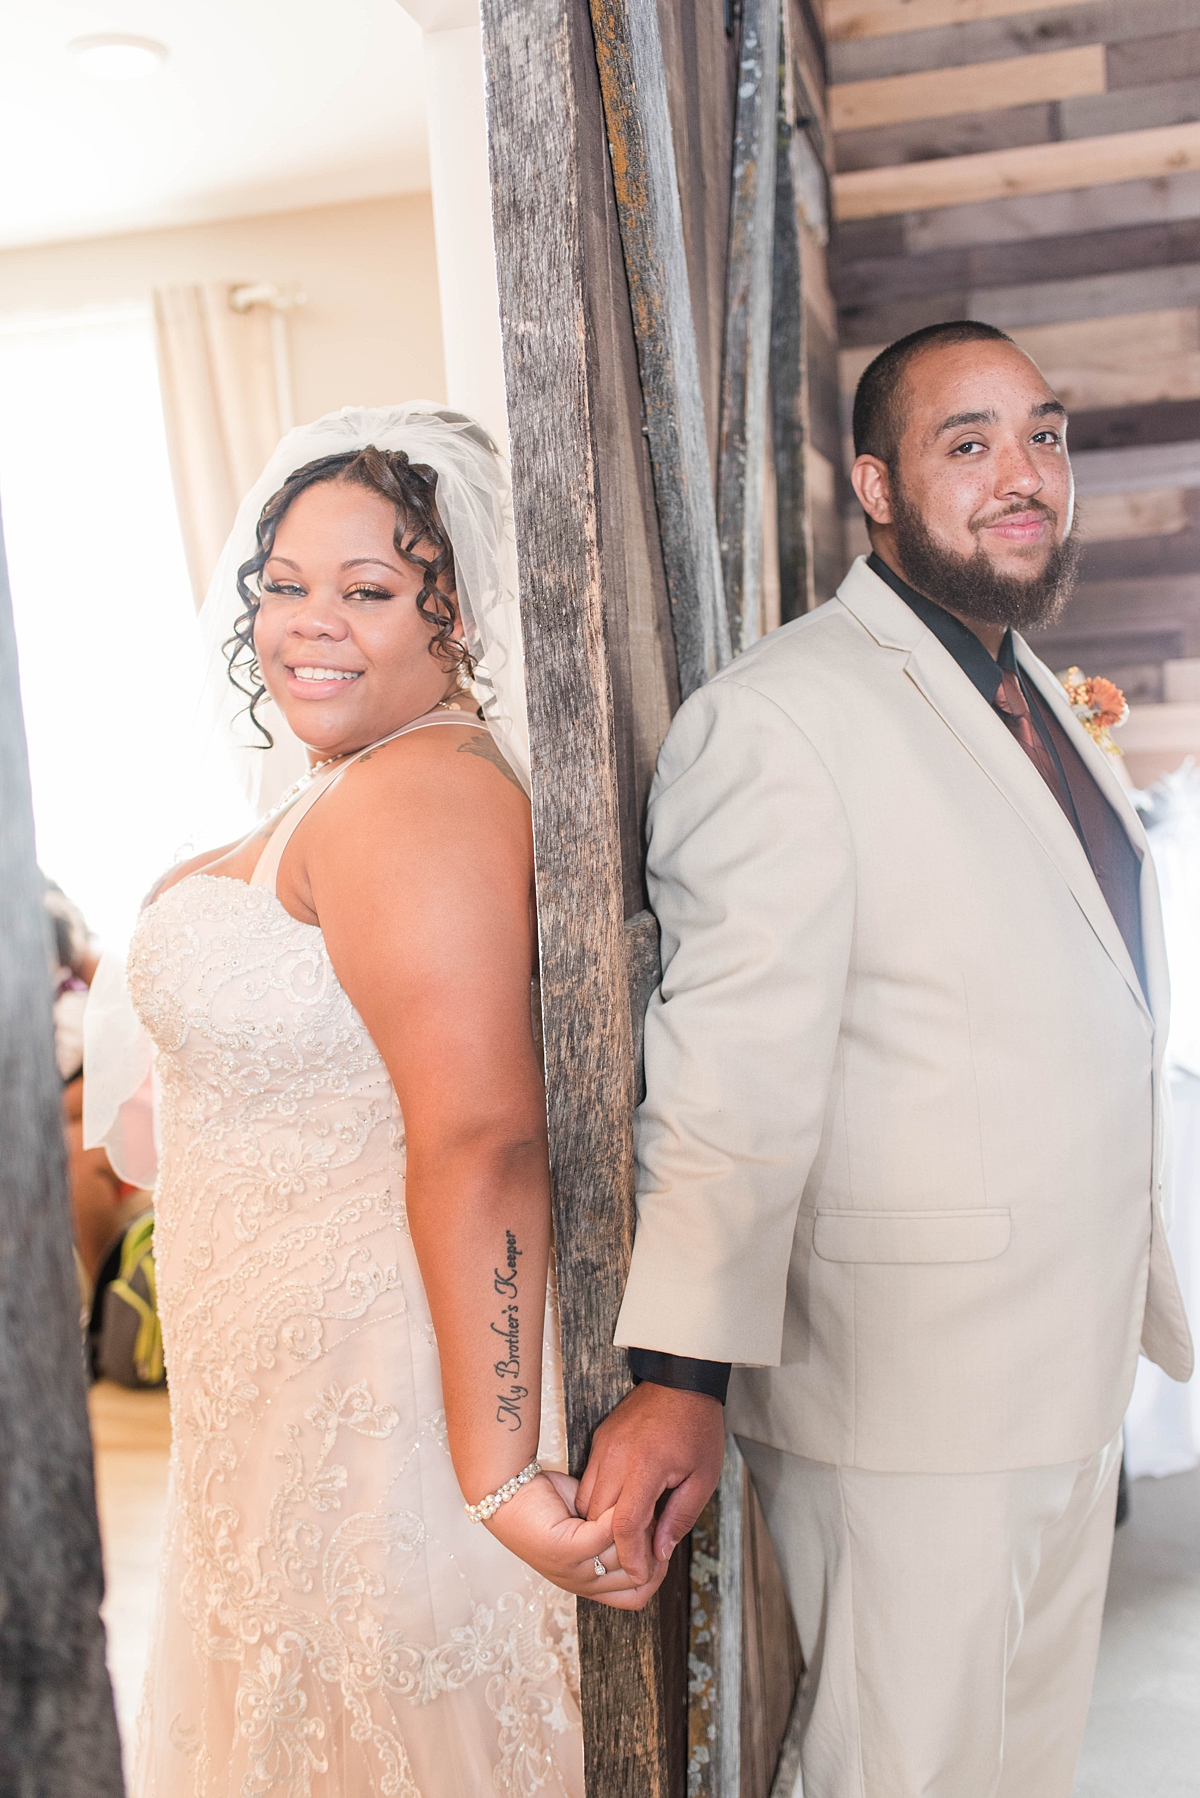 First Look Portraits at Lake at Cedar Hill in Lineville, Virginia. Fall Wedding Photography by Kailey Brianne Photography.